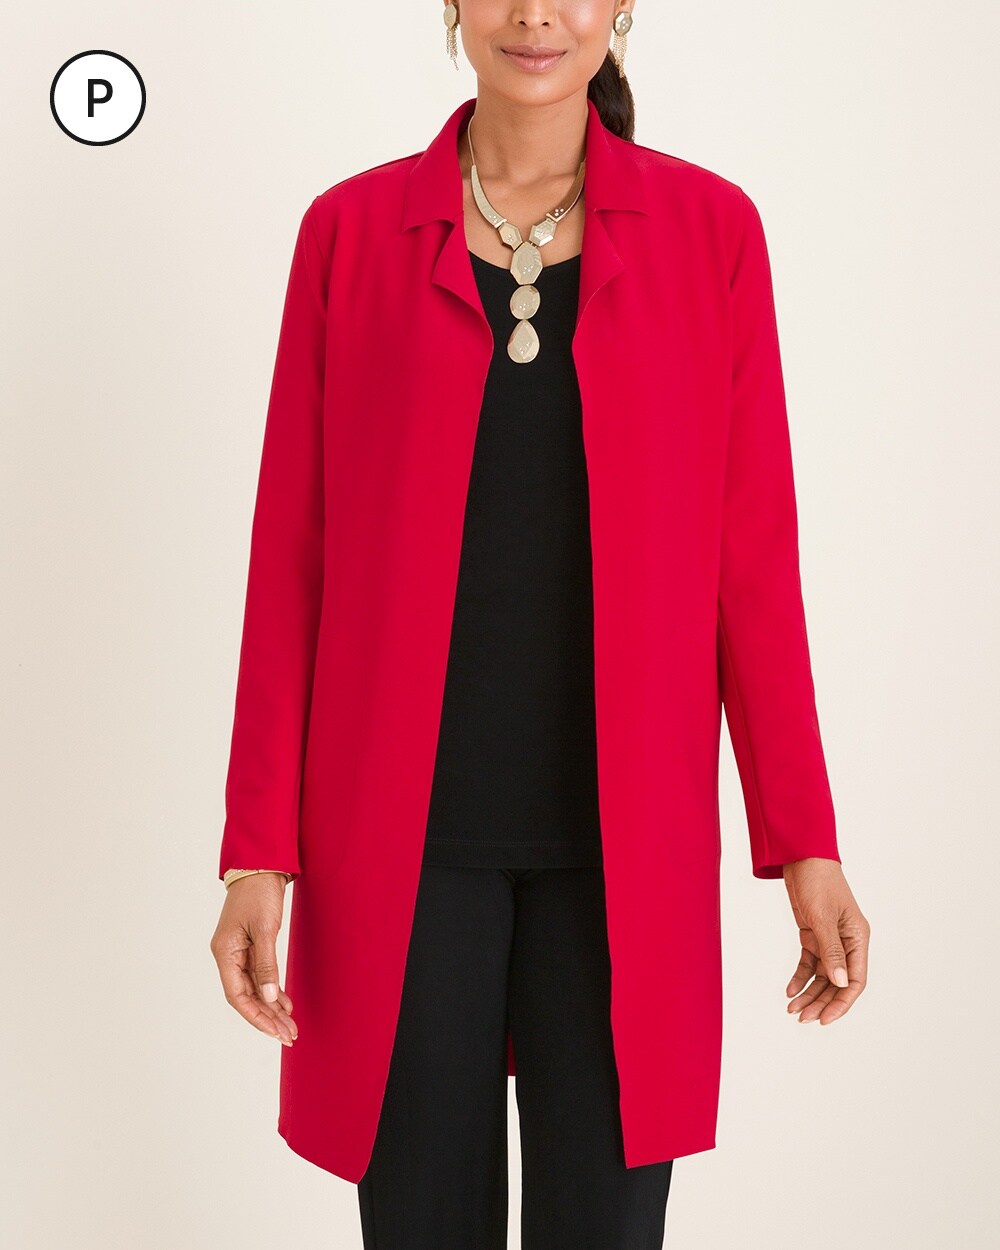 Travelers Collection Petite Red Double-Faced Jacket